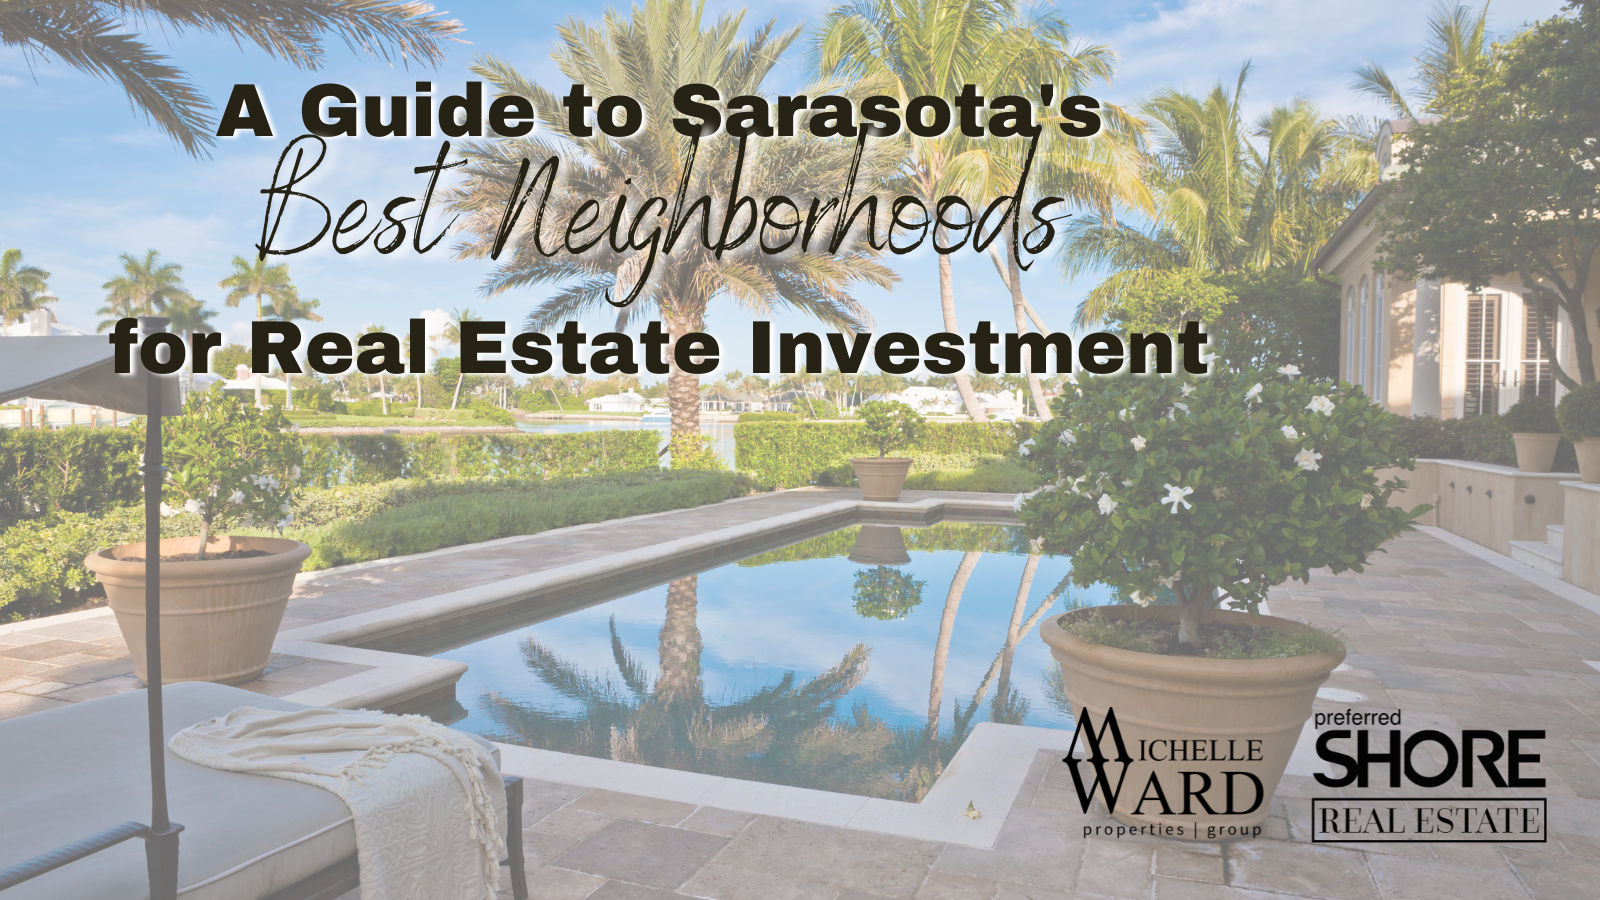 A Guide to Sarasota's Best Neighborhoods for Real Estate Investment